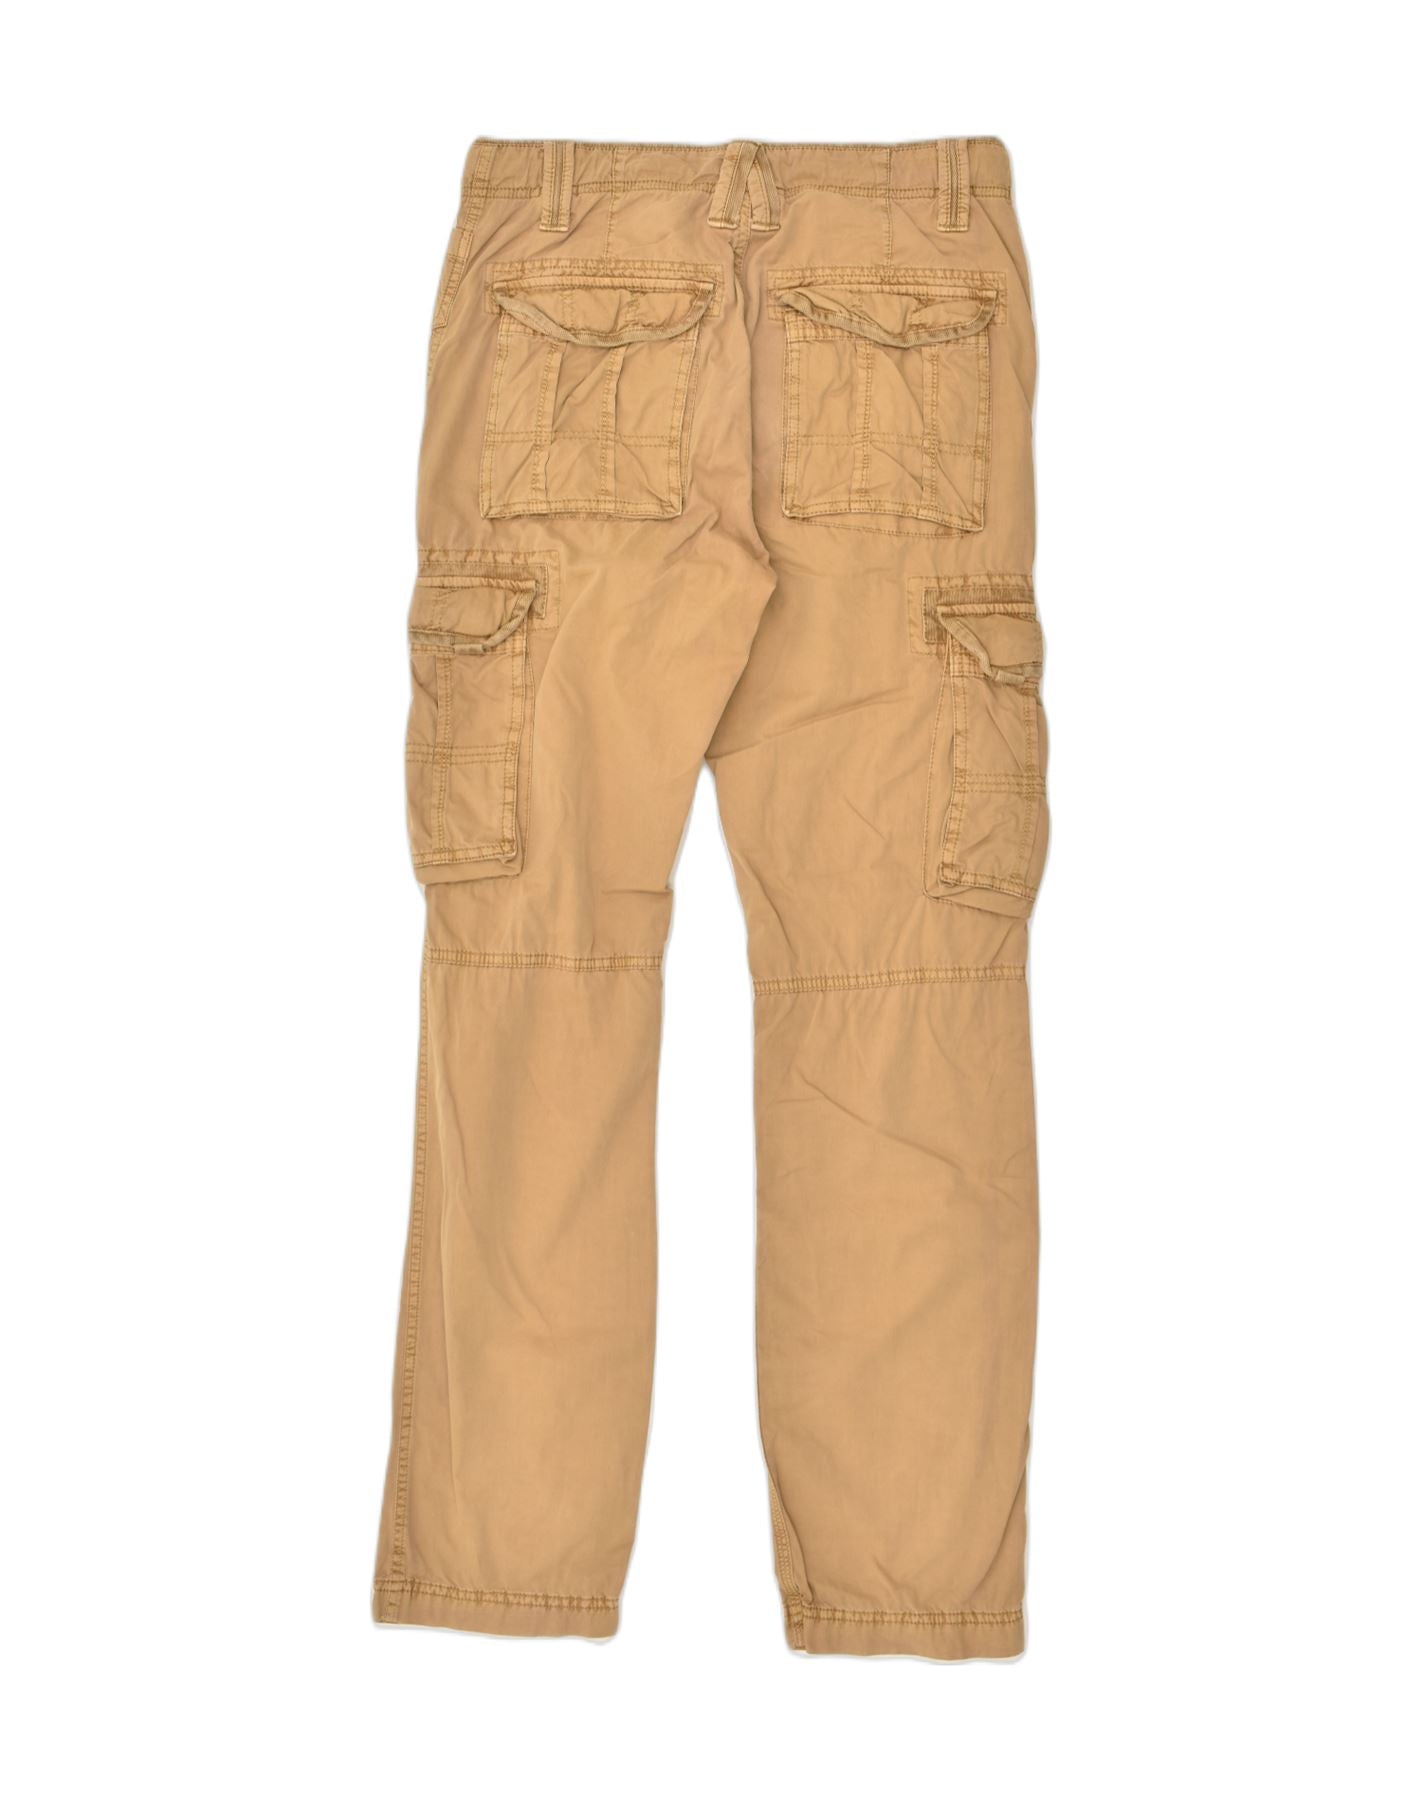 United Colors of Benetton Slim Fit Men Brown Trousers - Buy United Colors  of Benetton Slim Fit Men Brown Trousers Online at Best Prices in India |  Flipkart.com